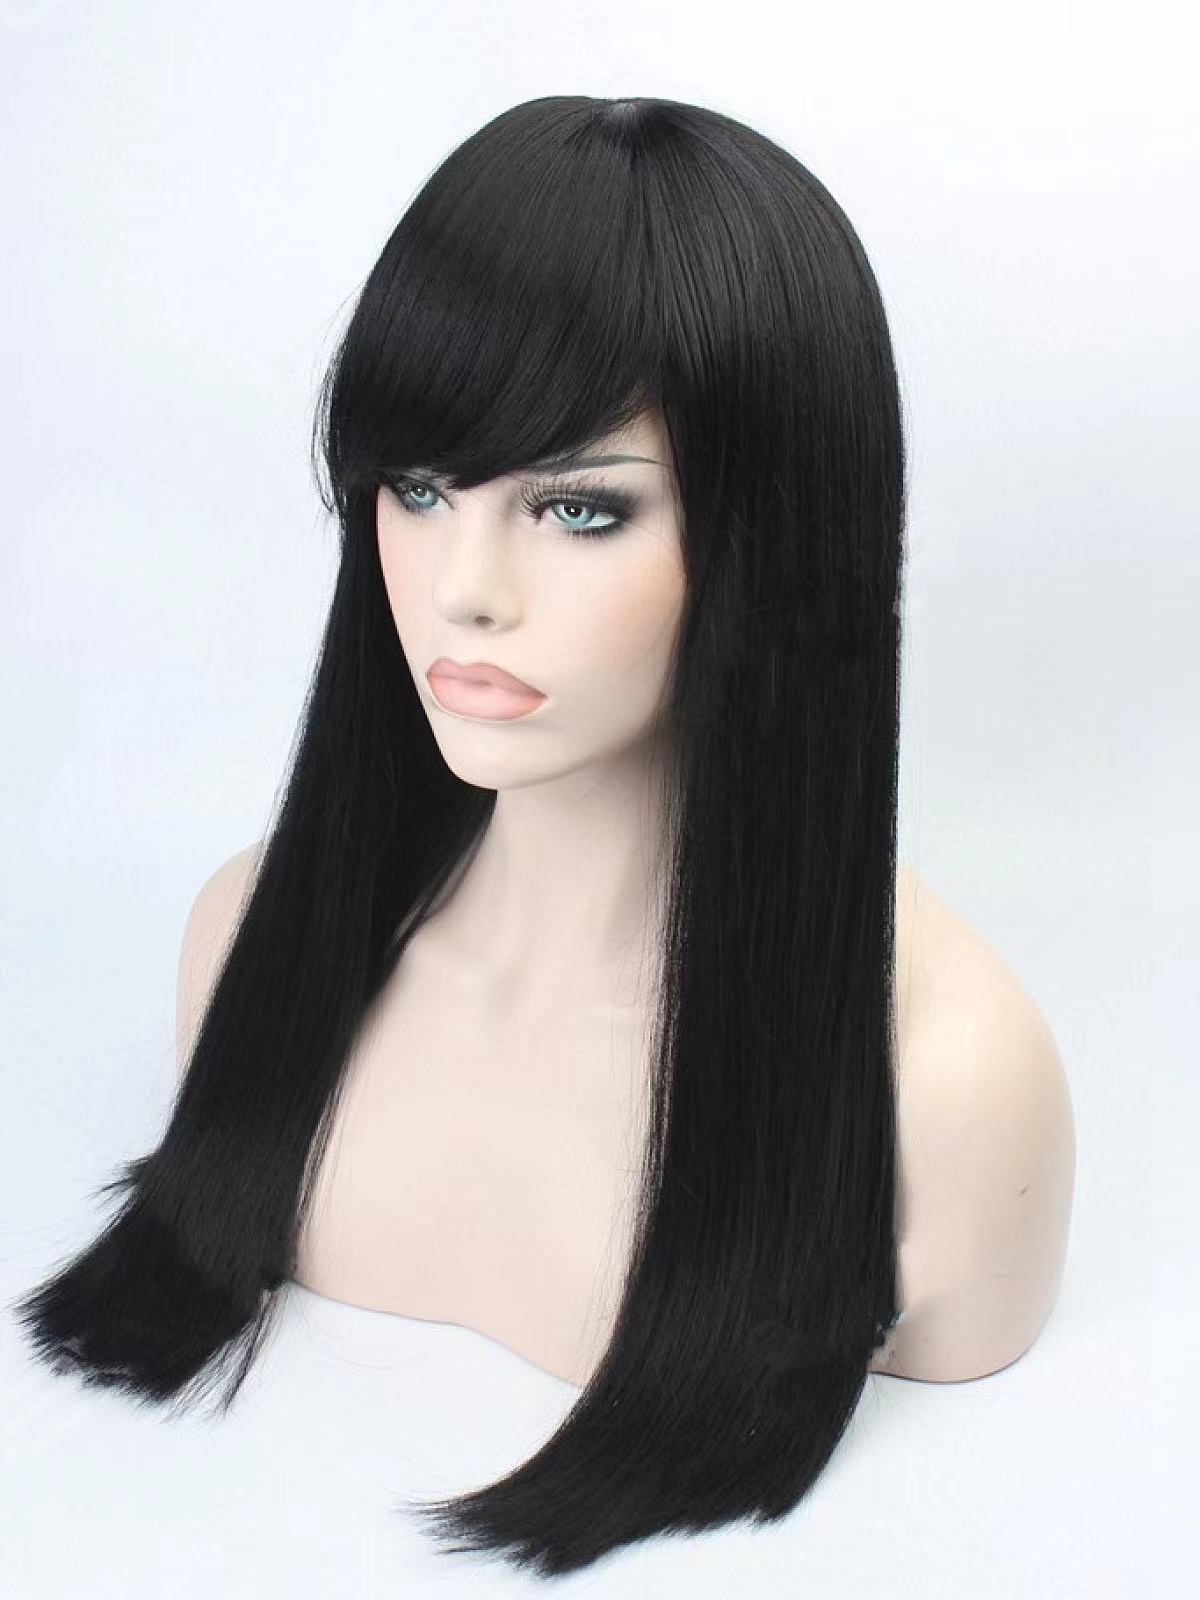 Classic Black Long Straight Sleek Synthetic Wefted Cap Wig With Full Blunt Bangs